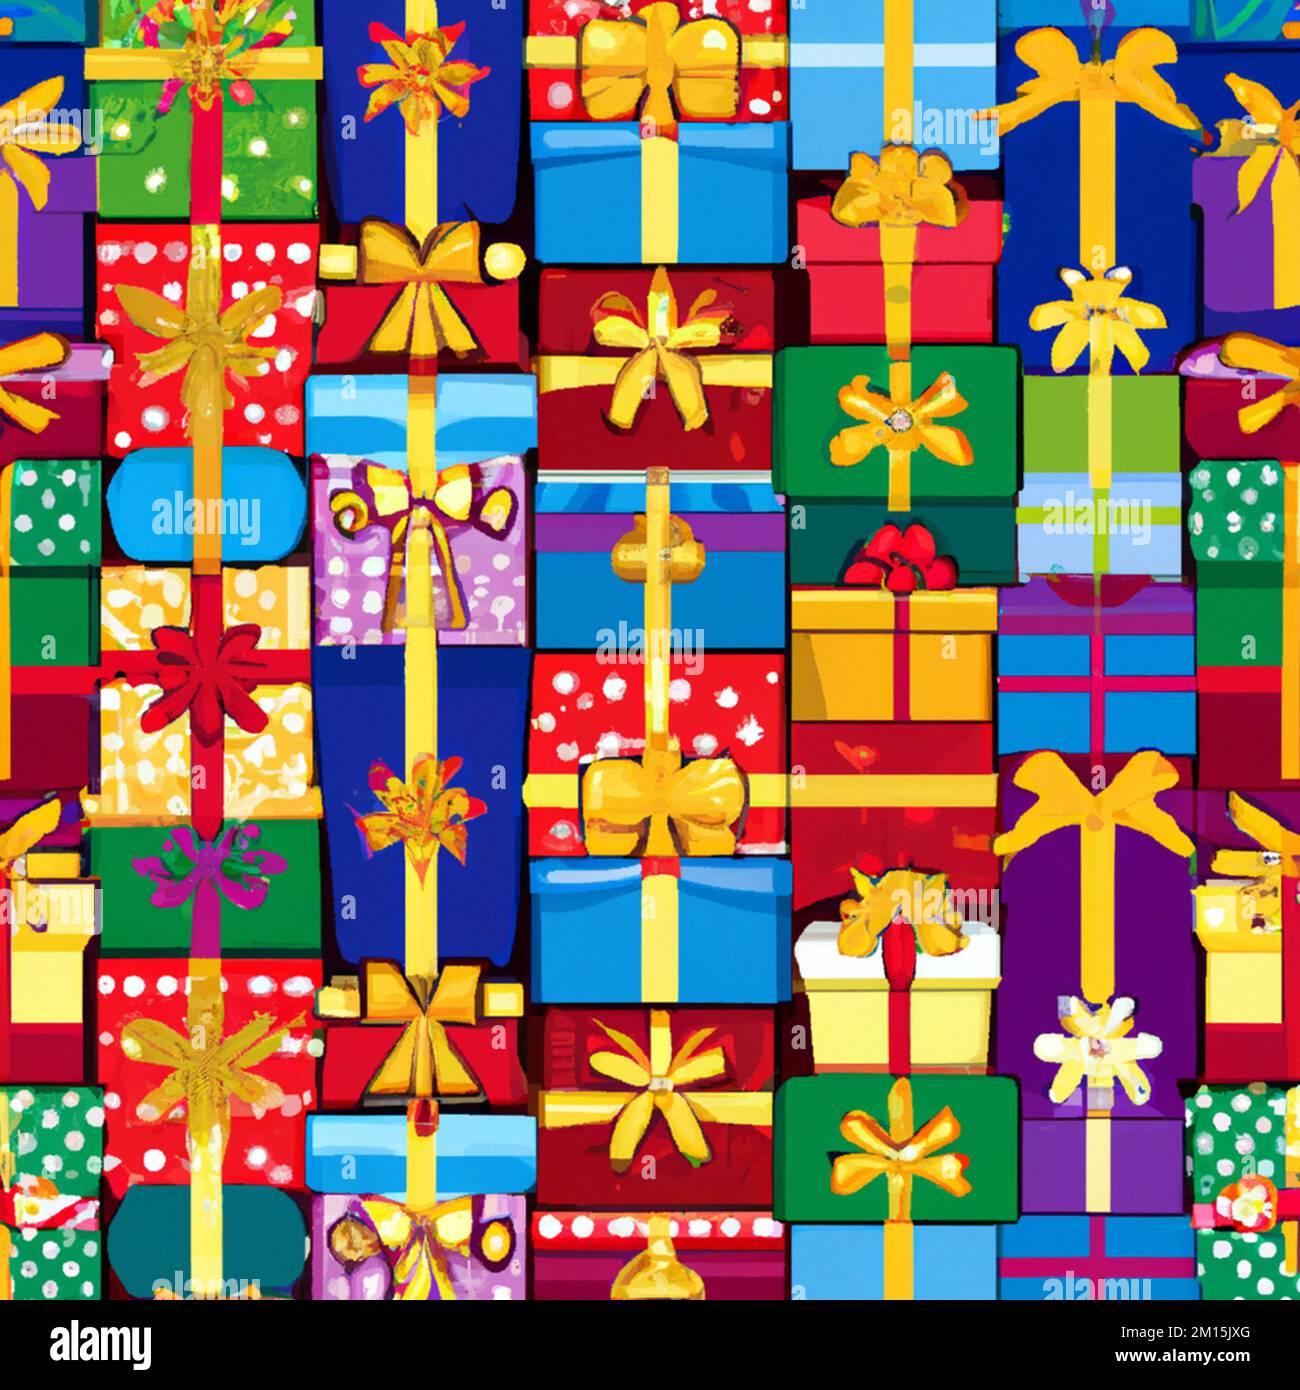 Holiday gift packages, wrapped with ribbons and bows. Background with colorful decorated gift boxes. Stock Photo